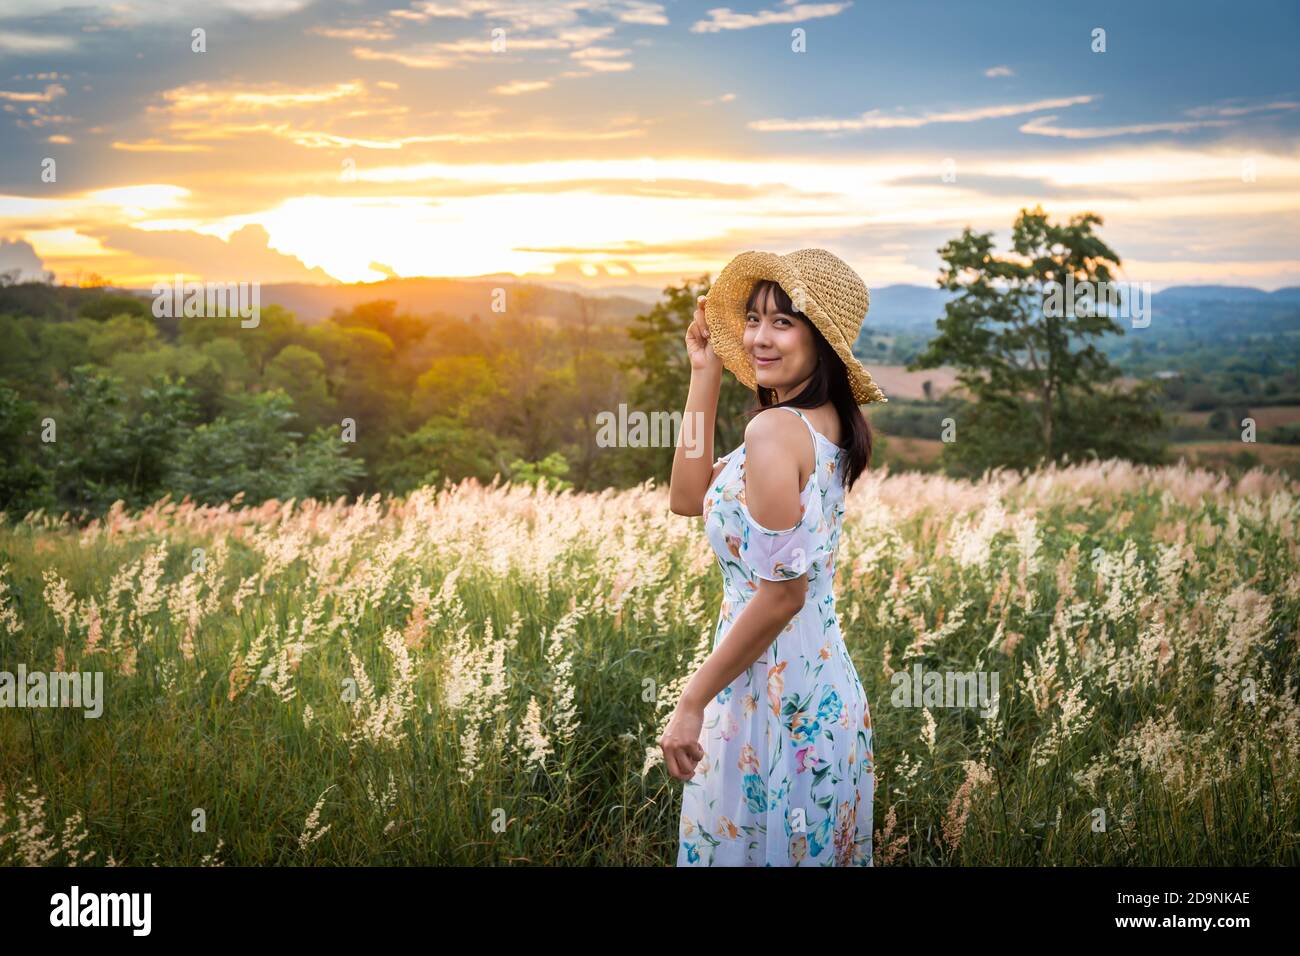 The girl wearing a hat, wearing a white dress, stand in the middle of the grass with beautiful white flowers with a relaxed and happy mood on mountain Stock Photo